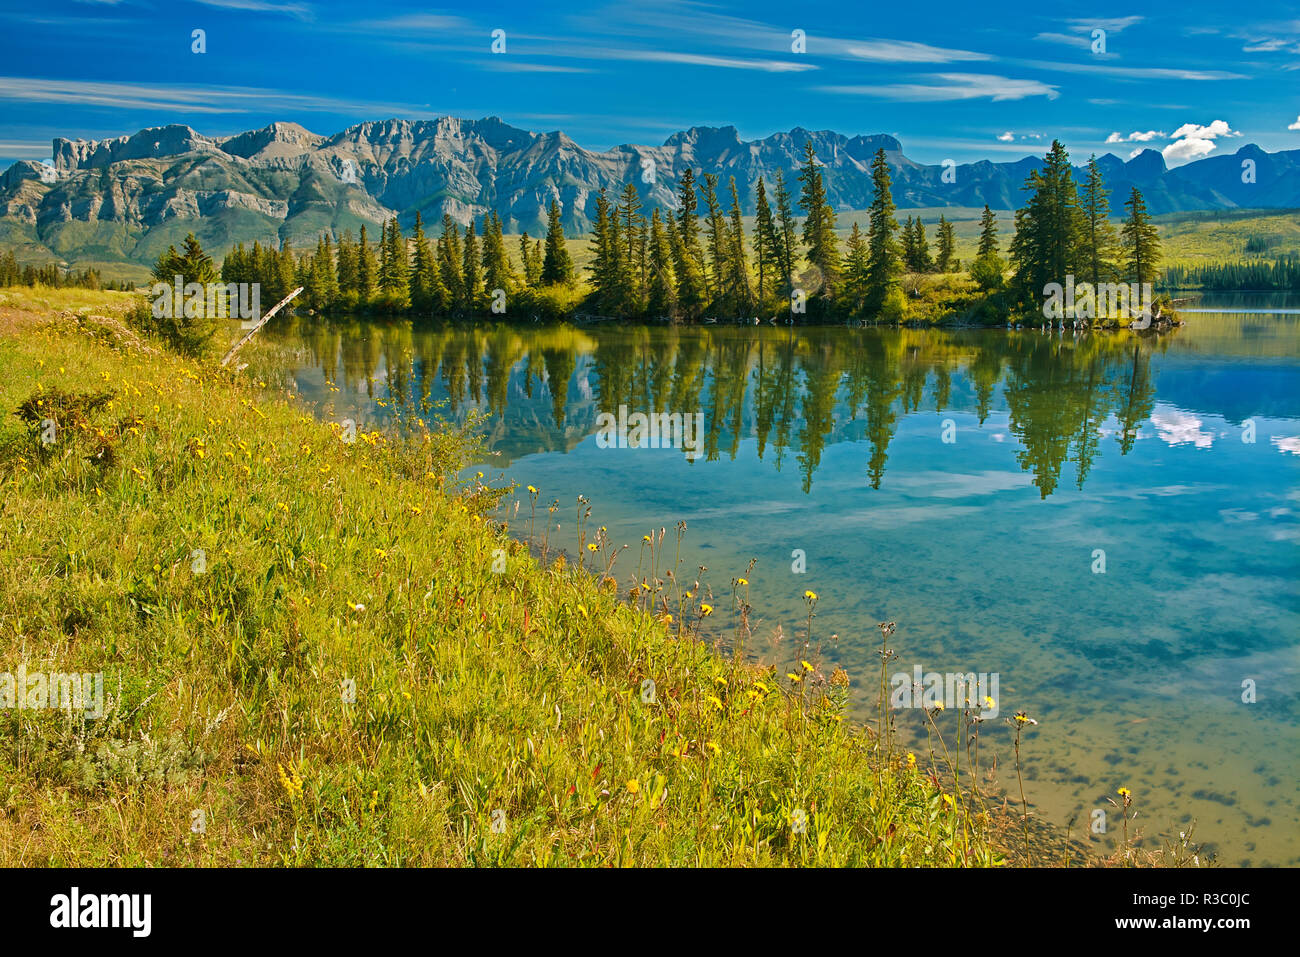 Canada, Alberta, Jasper National Park. Mountains and trees reflection in Talbot Lake. Stock Photo